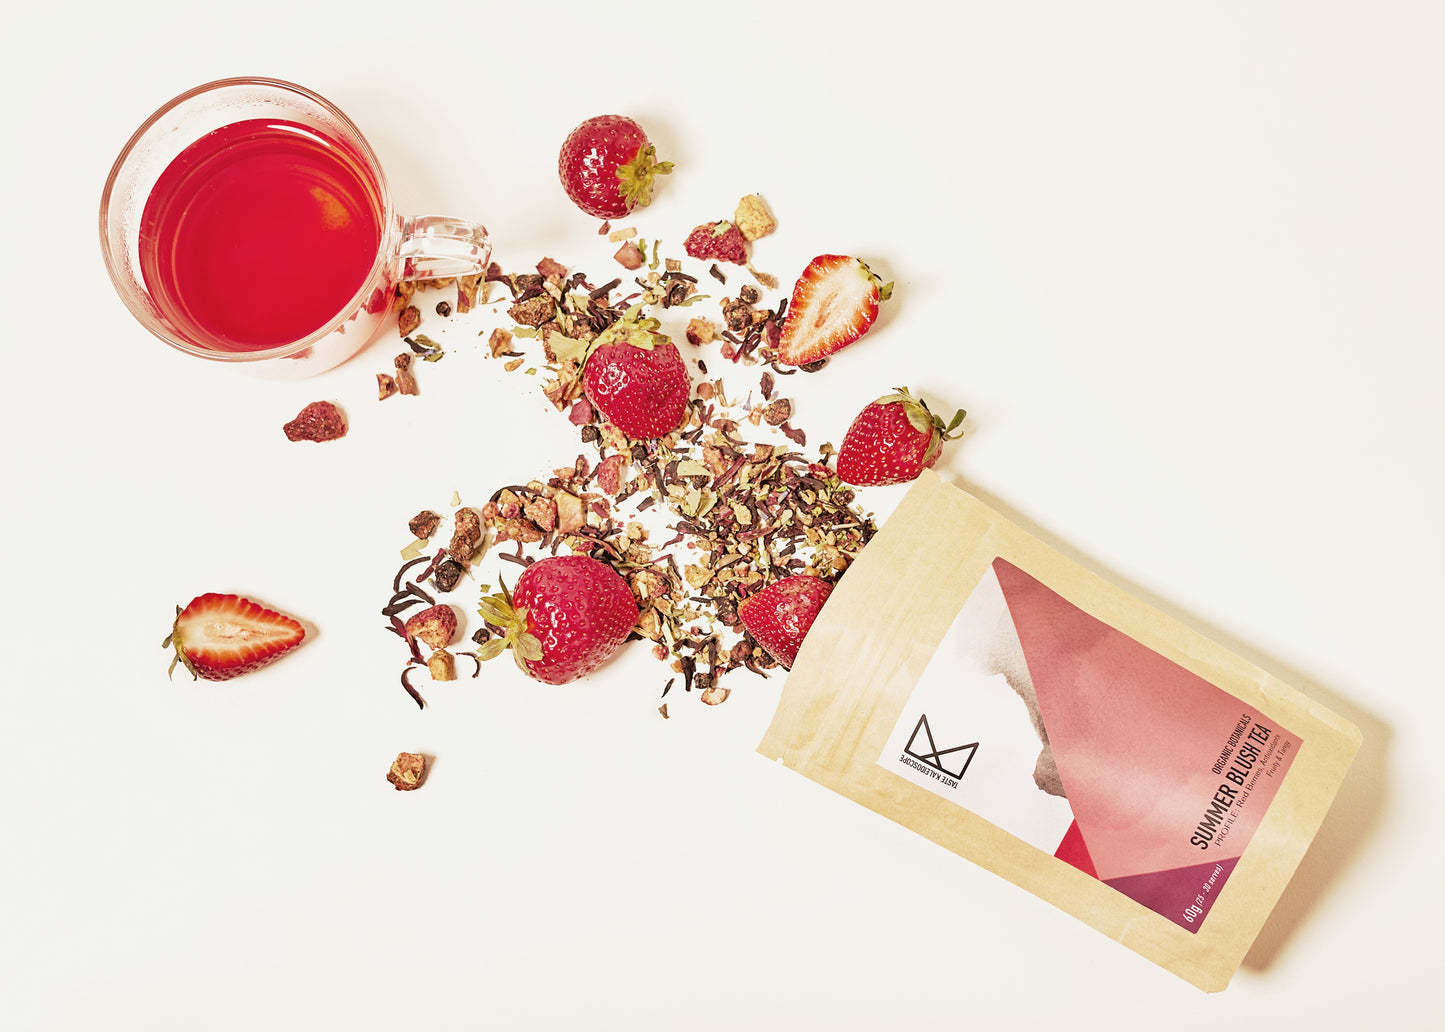 Summer Blush Tea 60g  [Red Strawberries, Tangy & Juicy]